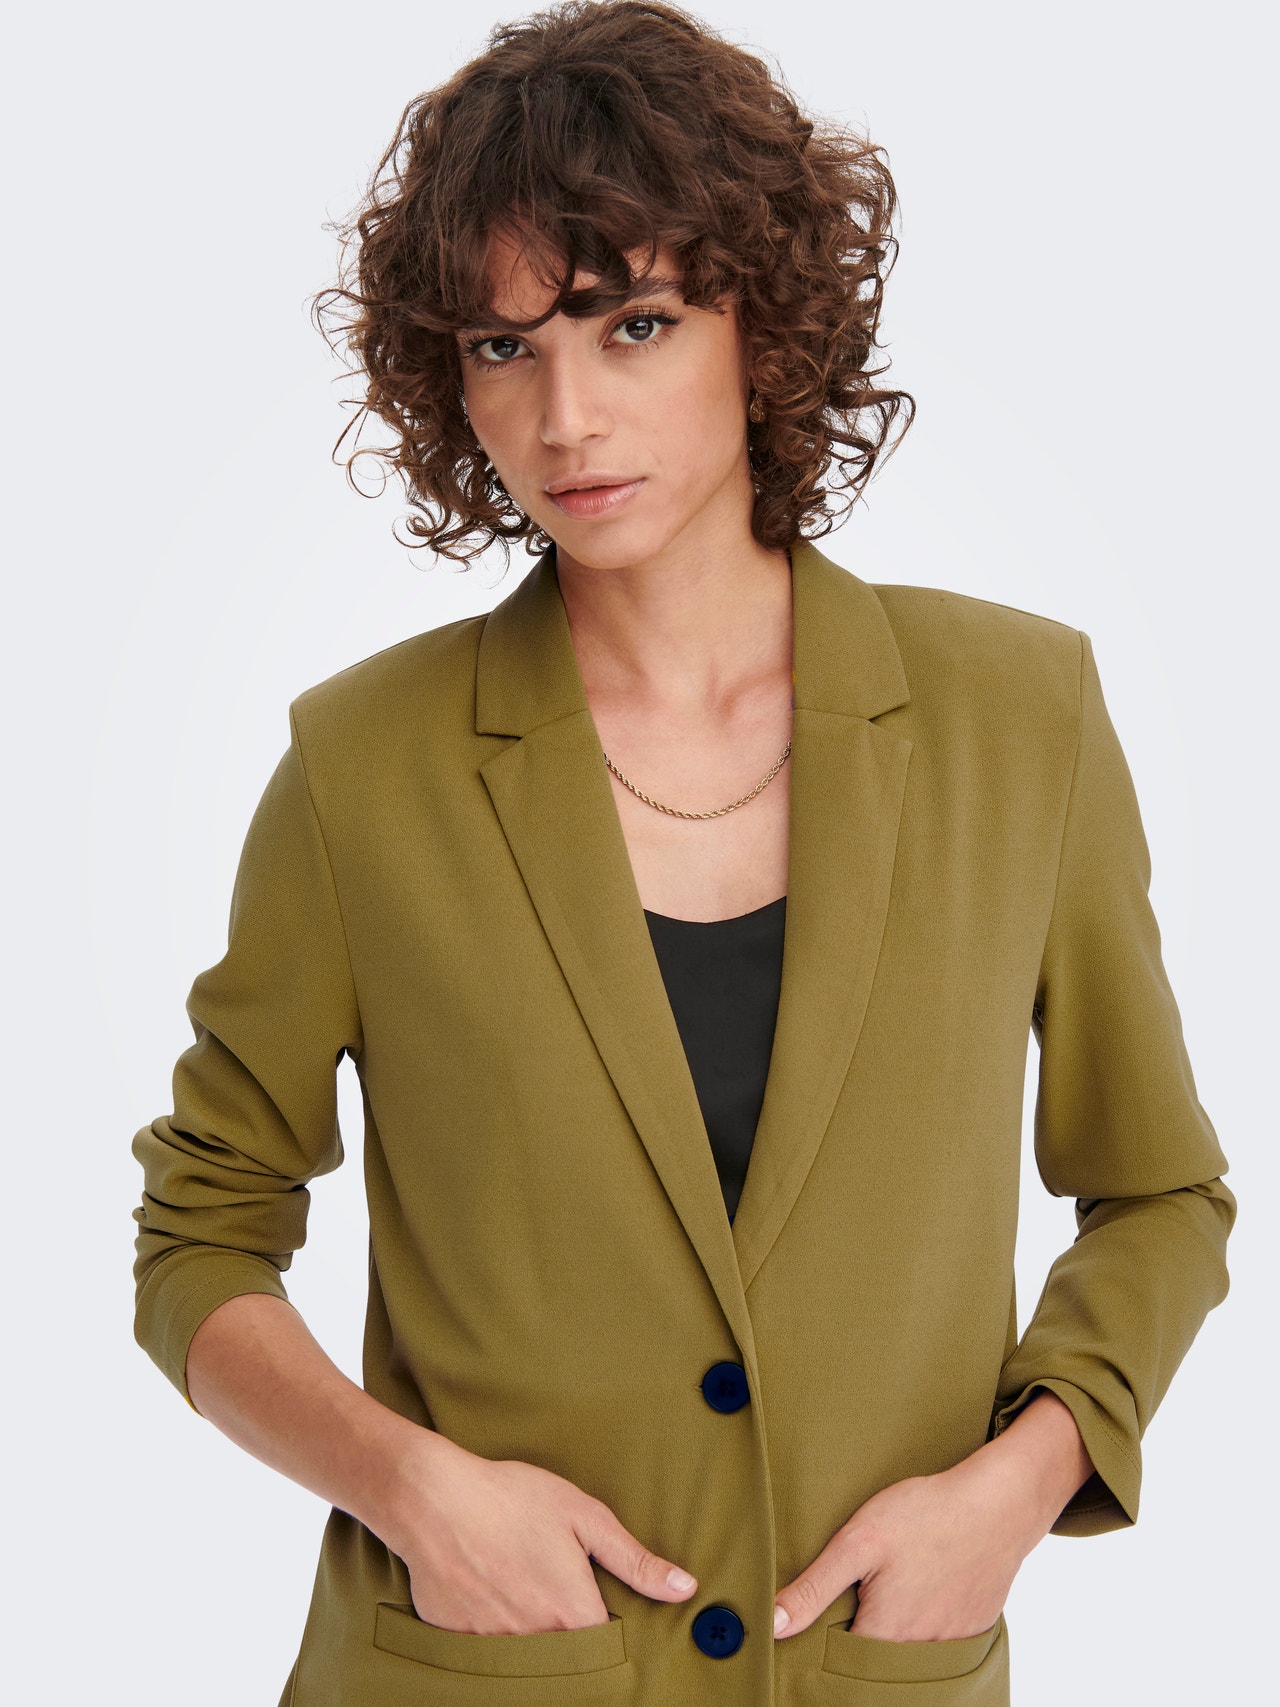 ONLY Blazer with buttons -Ecru Olive - 15221235